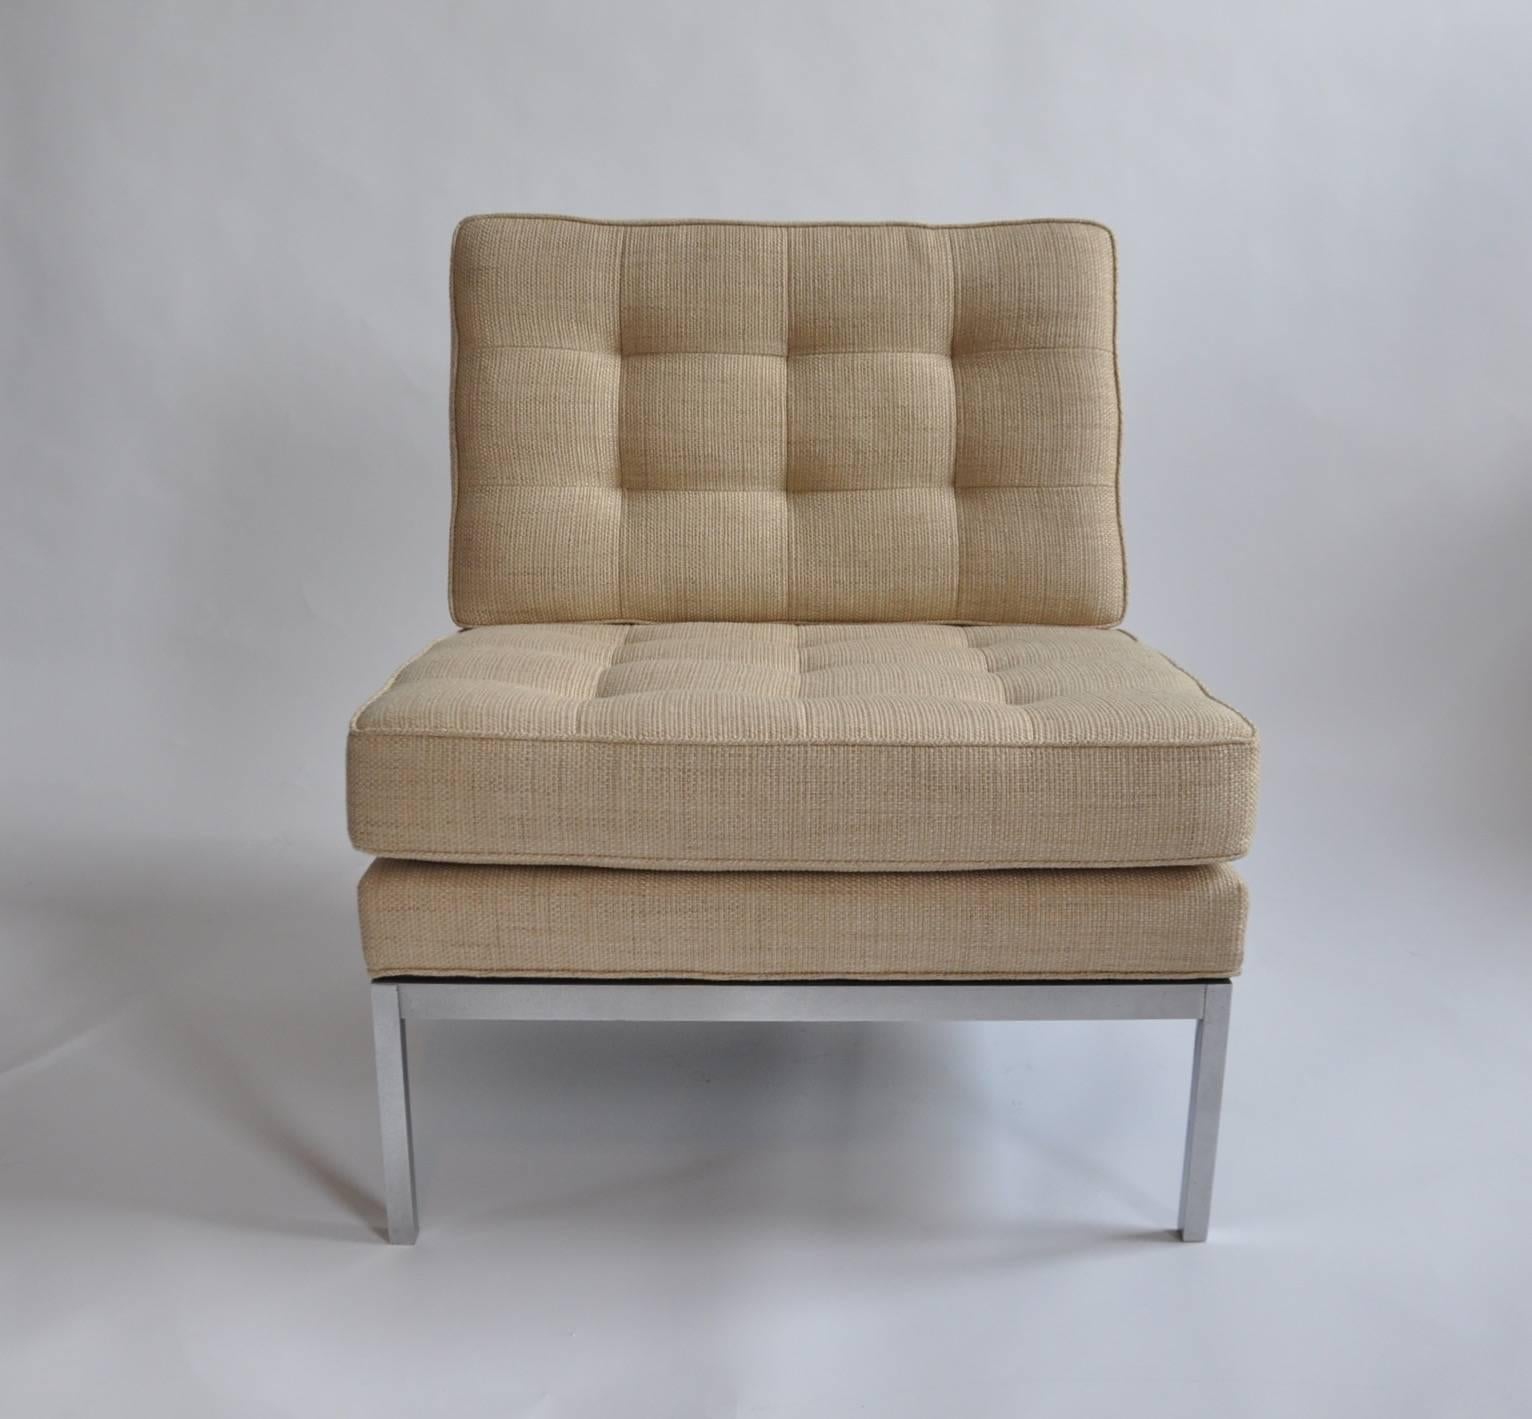 Pair of upholstered lounge chair with stainless base by Florence Knoll, Knoll.